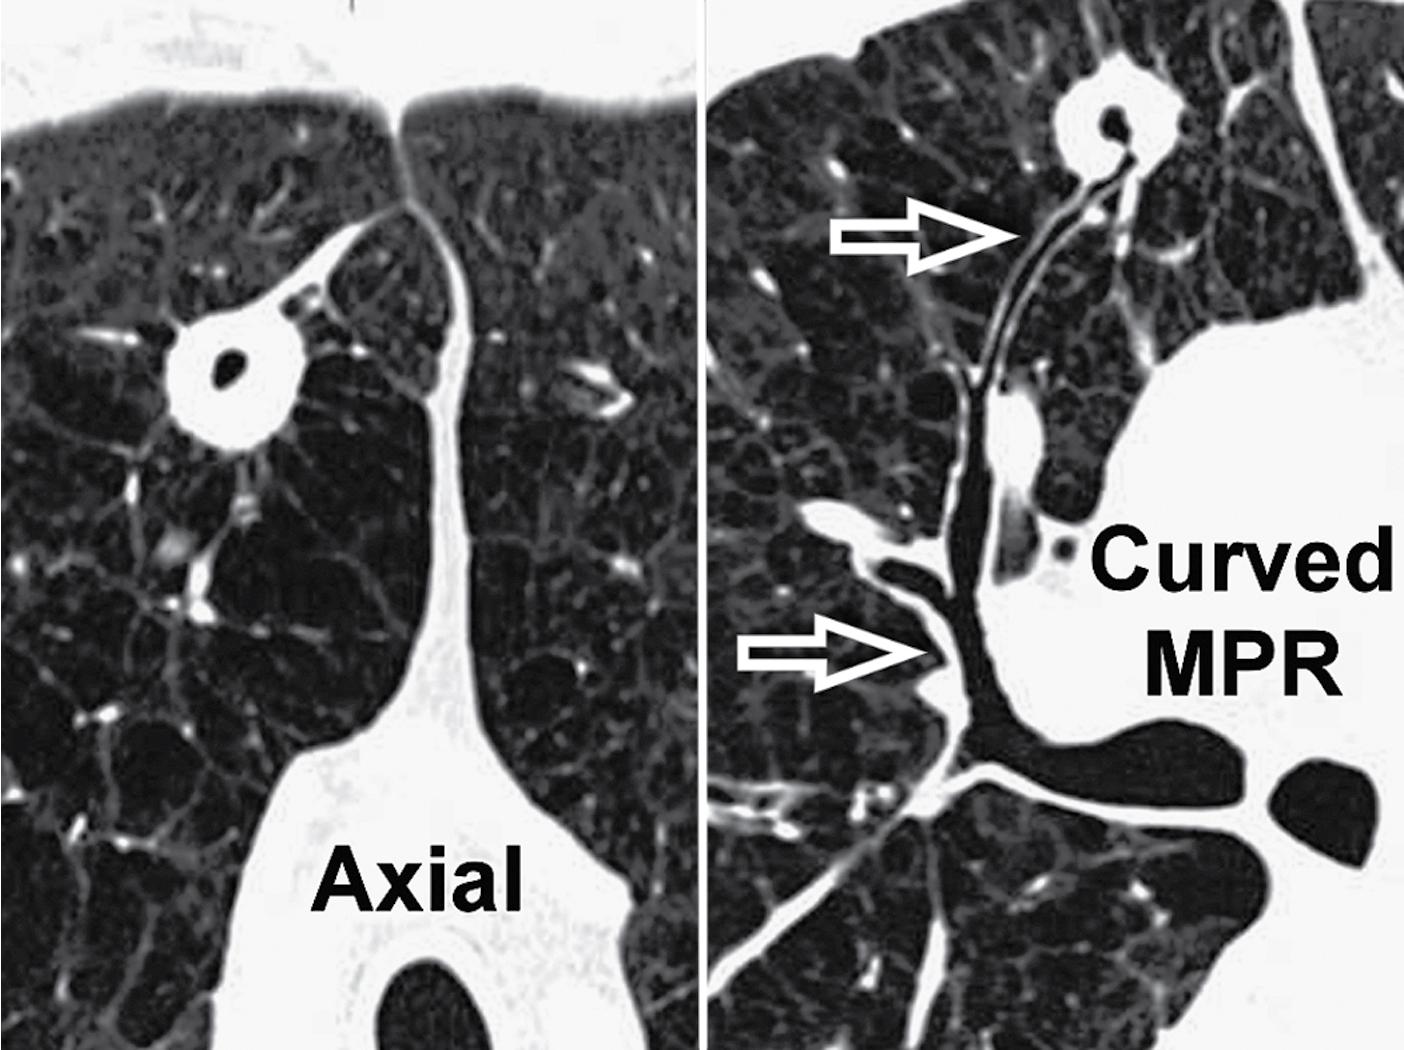 Figure 4.9, Axial view (left) and curved reformatted image (right) of the right paramediastinal region in a patient with emphysema and a cavitary lesion of the lung. The axial image is in a plane. The right is artificially reconstructed along the drainage bronchus (arrows) ; however, it is effective in showing the bronchial ramifications from the hilum to the periphery. MPR , Multiplanar reformation.